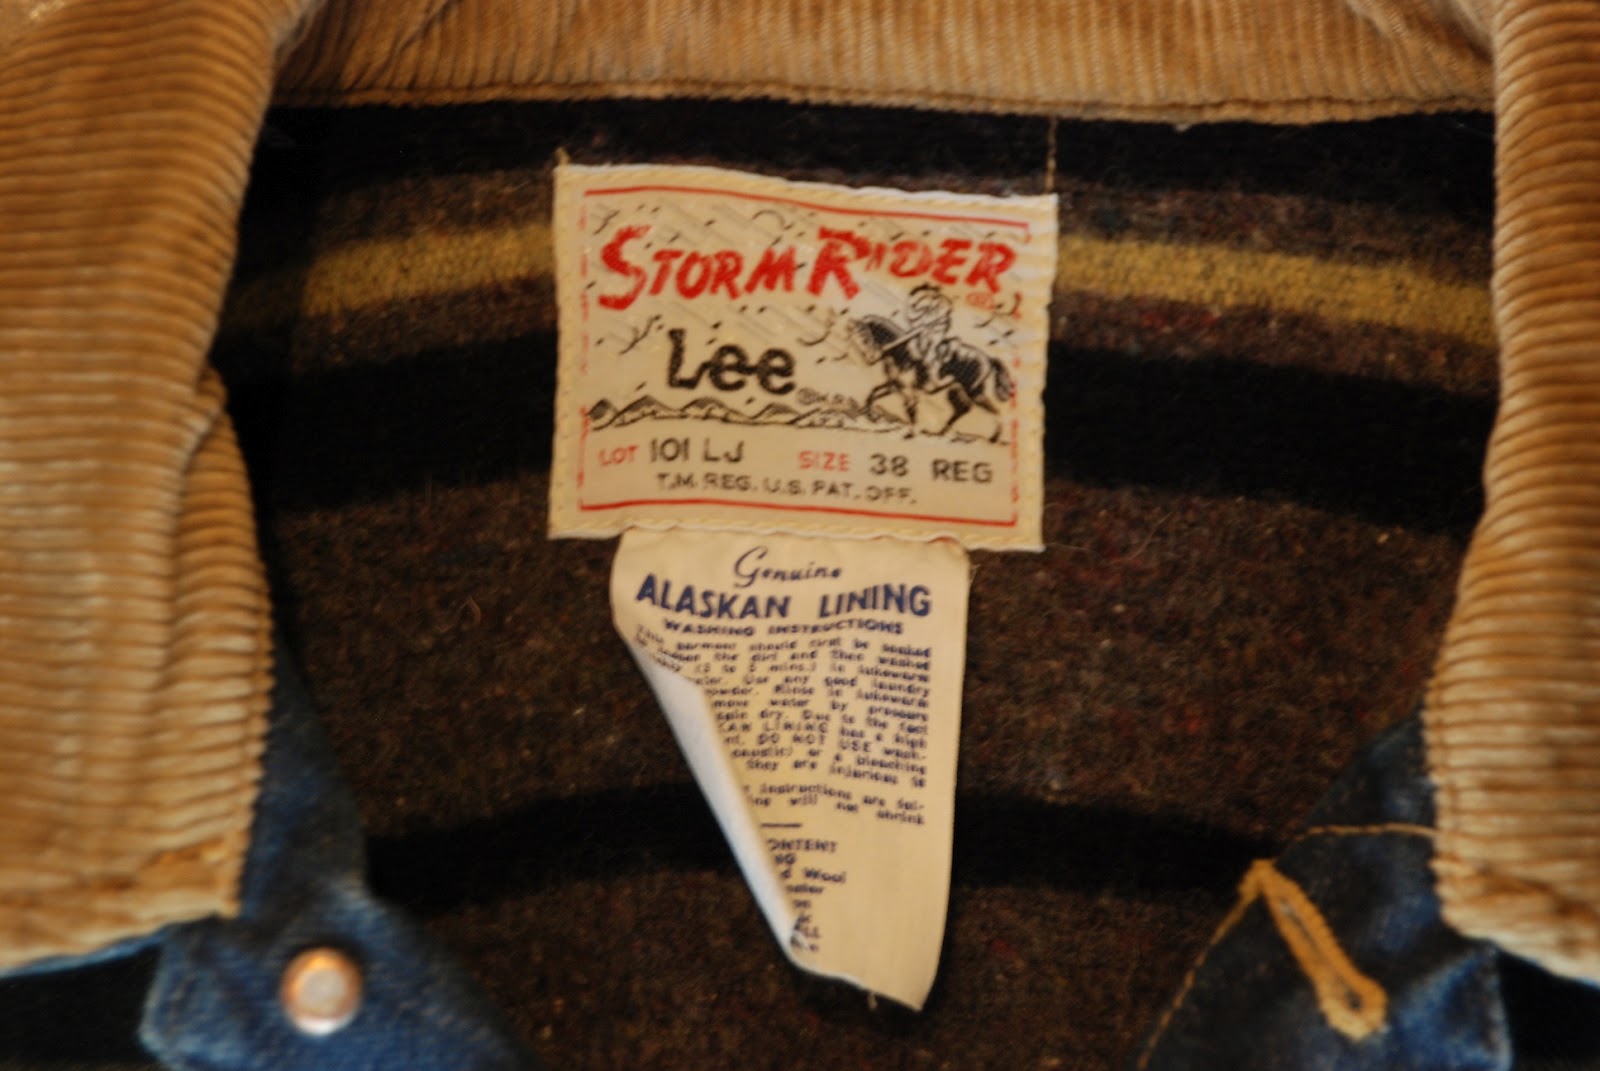 CHAD'S DRYGOODS: LEE STORM RIDER JACKET - HISTORY REPEATING